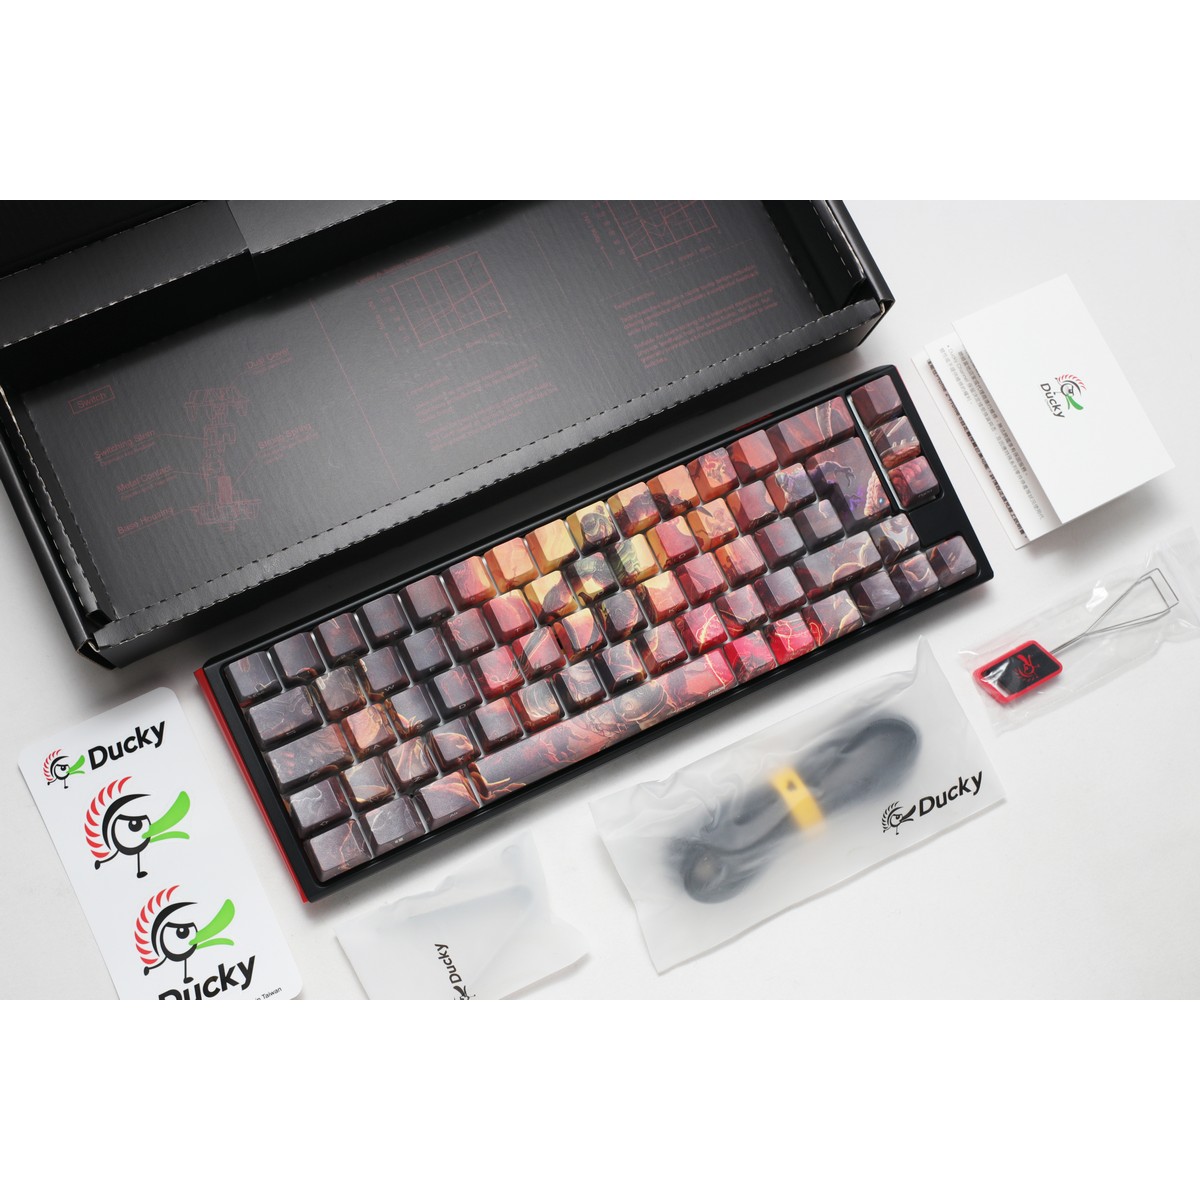 Ducky - Ducky x DOOM SF 65% Gaming Keyboard Limited Edition Cherry MX Blue Switches UK L